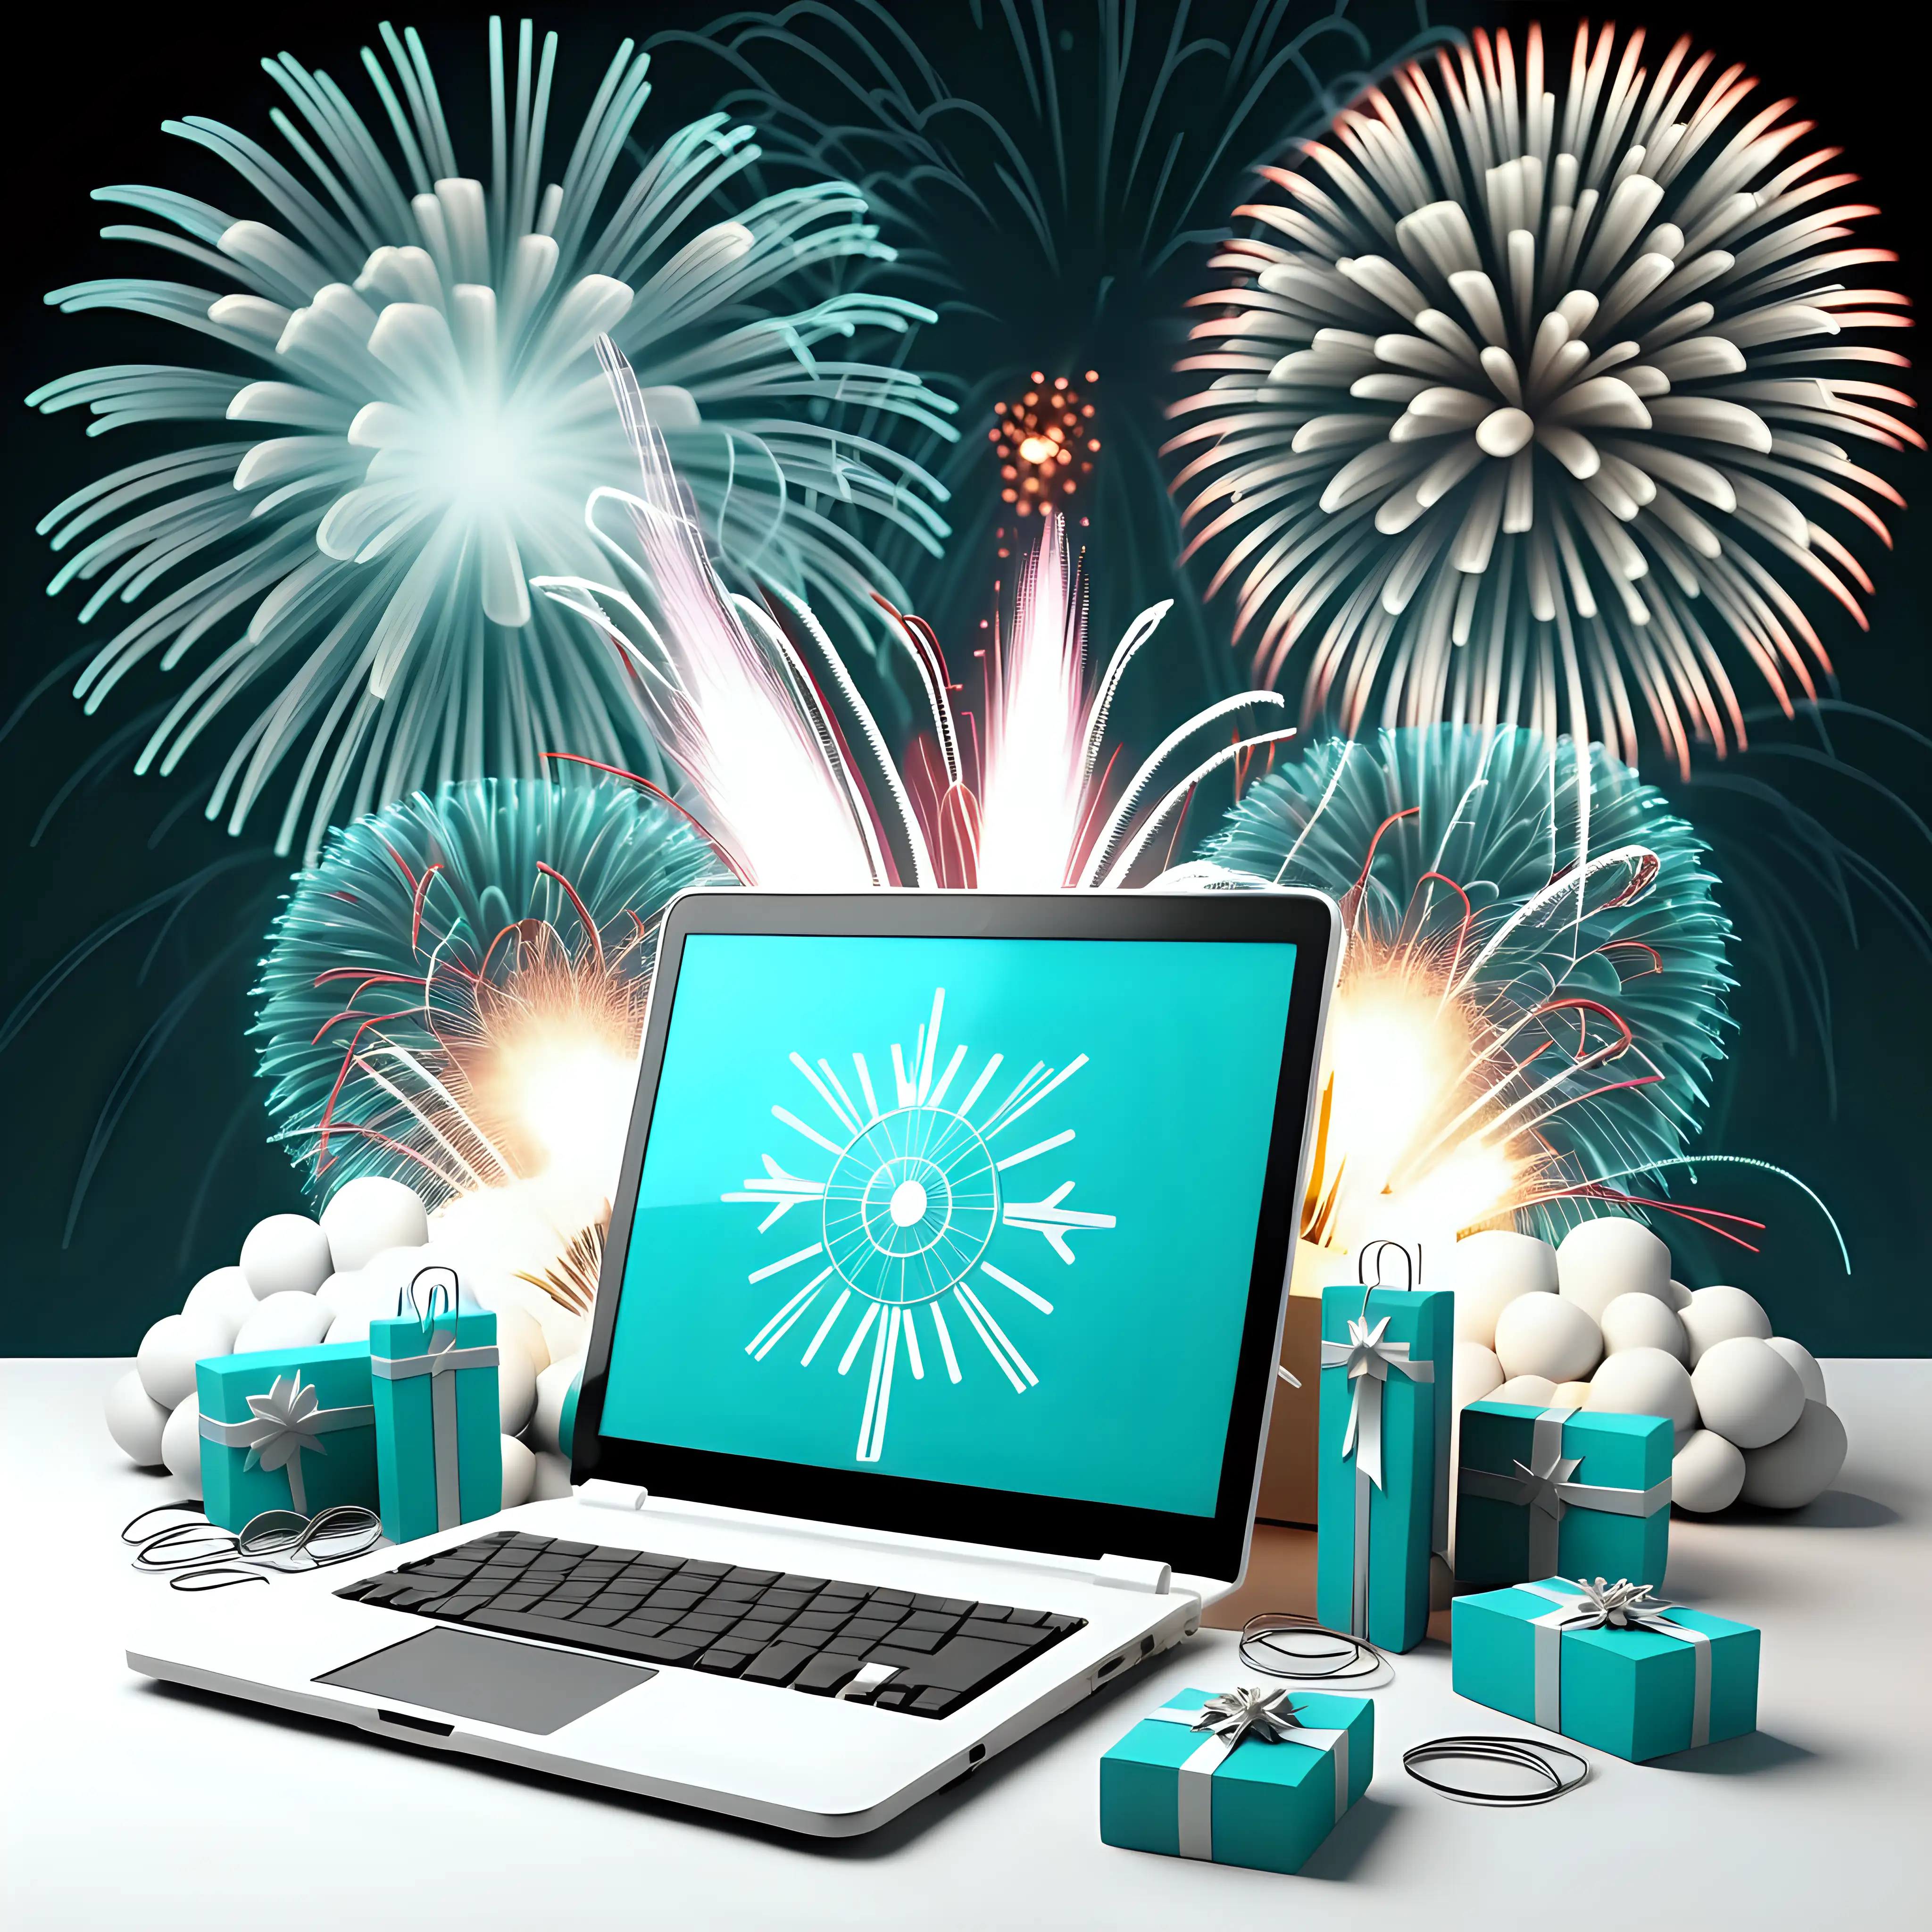 Turquoise and White New Years Eve Cyber Security Celebration with Fireworks